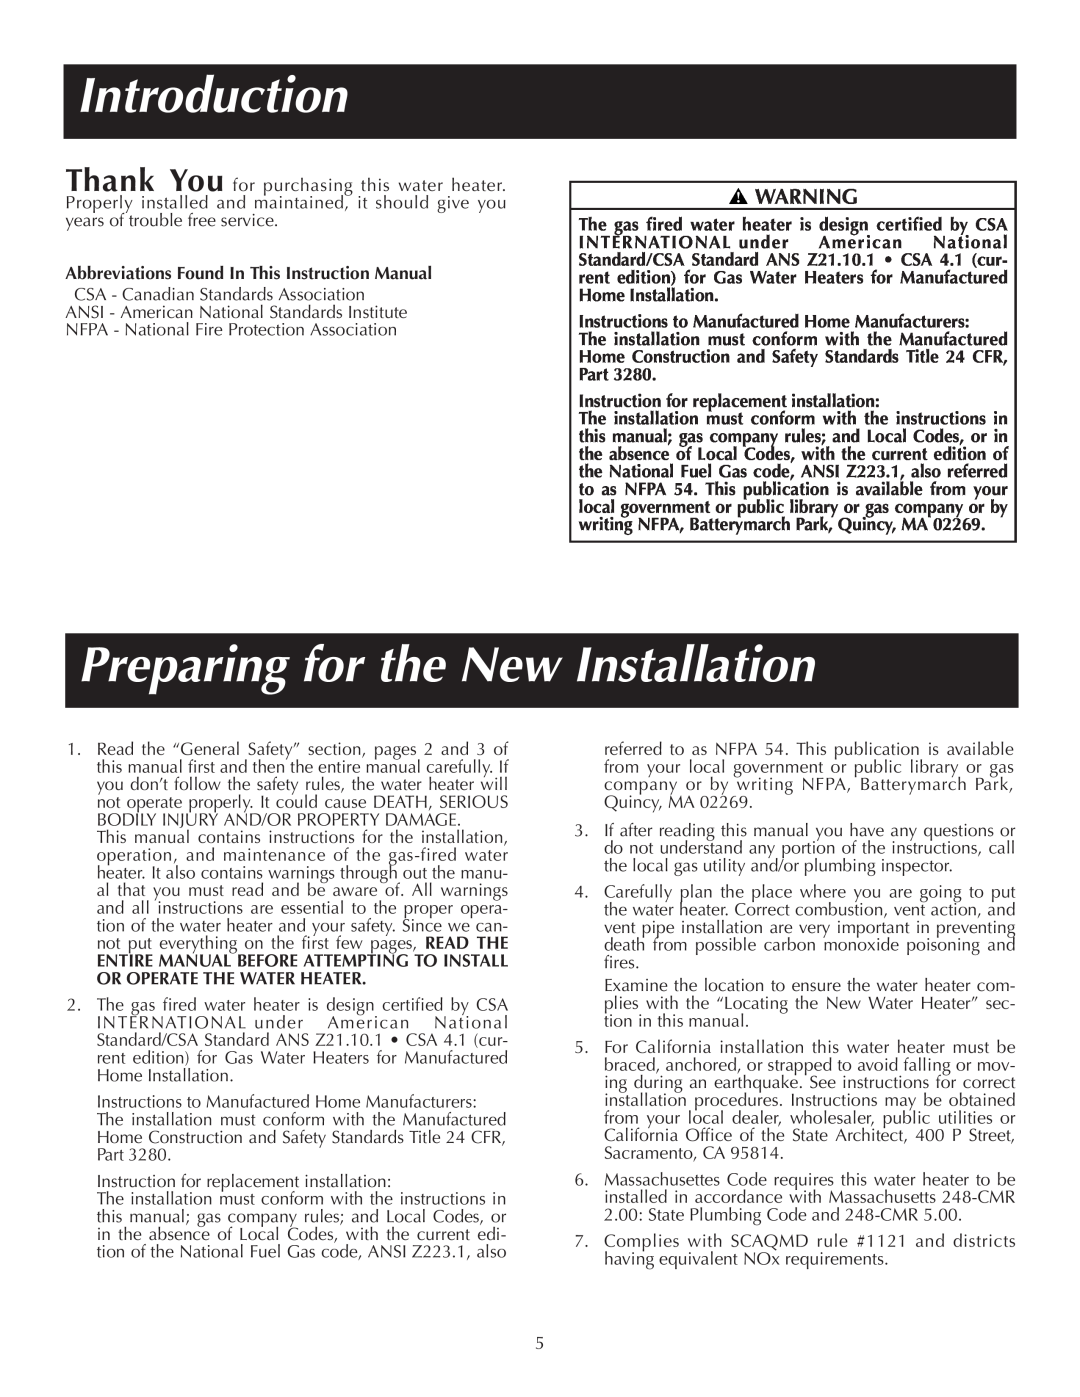 Reliance Water Heaters 184123-000 instruction manual Introduction, Preparing for the New Installation 